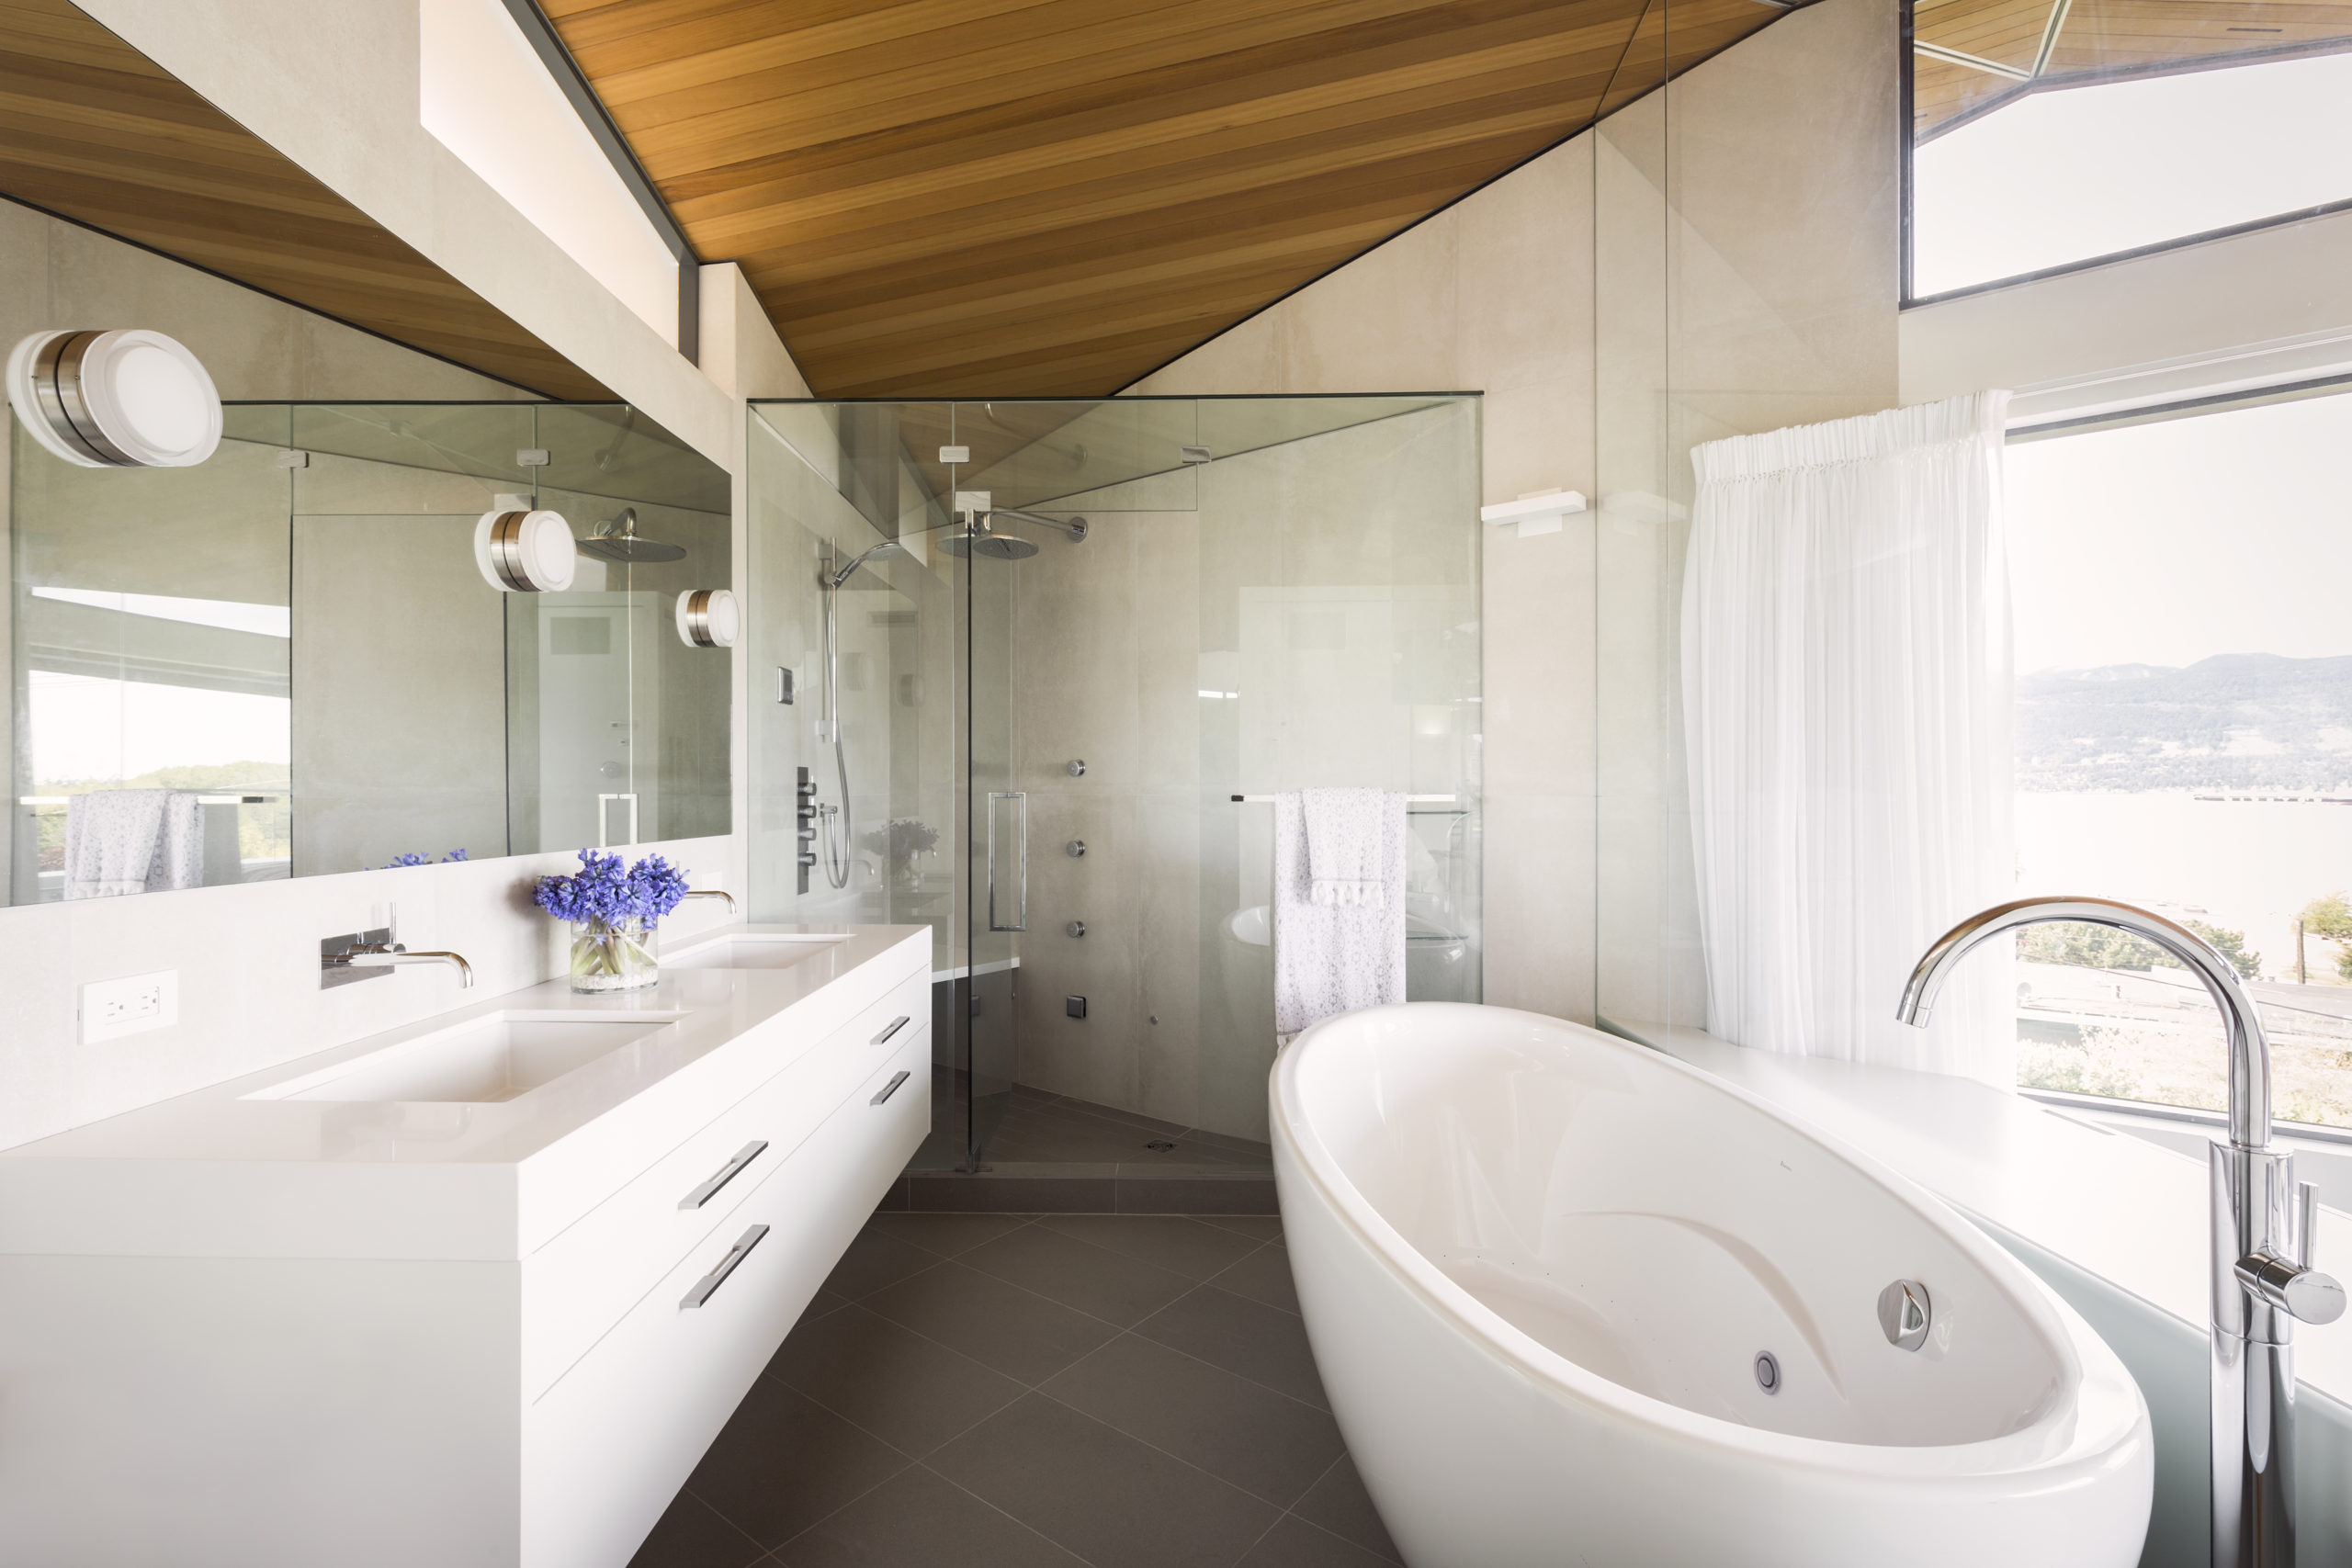 Shower and bathtub with a modern design and ocean view at our Spanish Banks custom home.